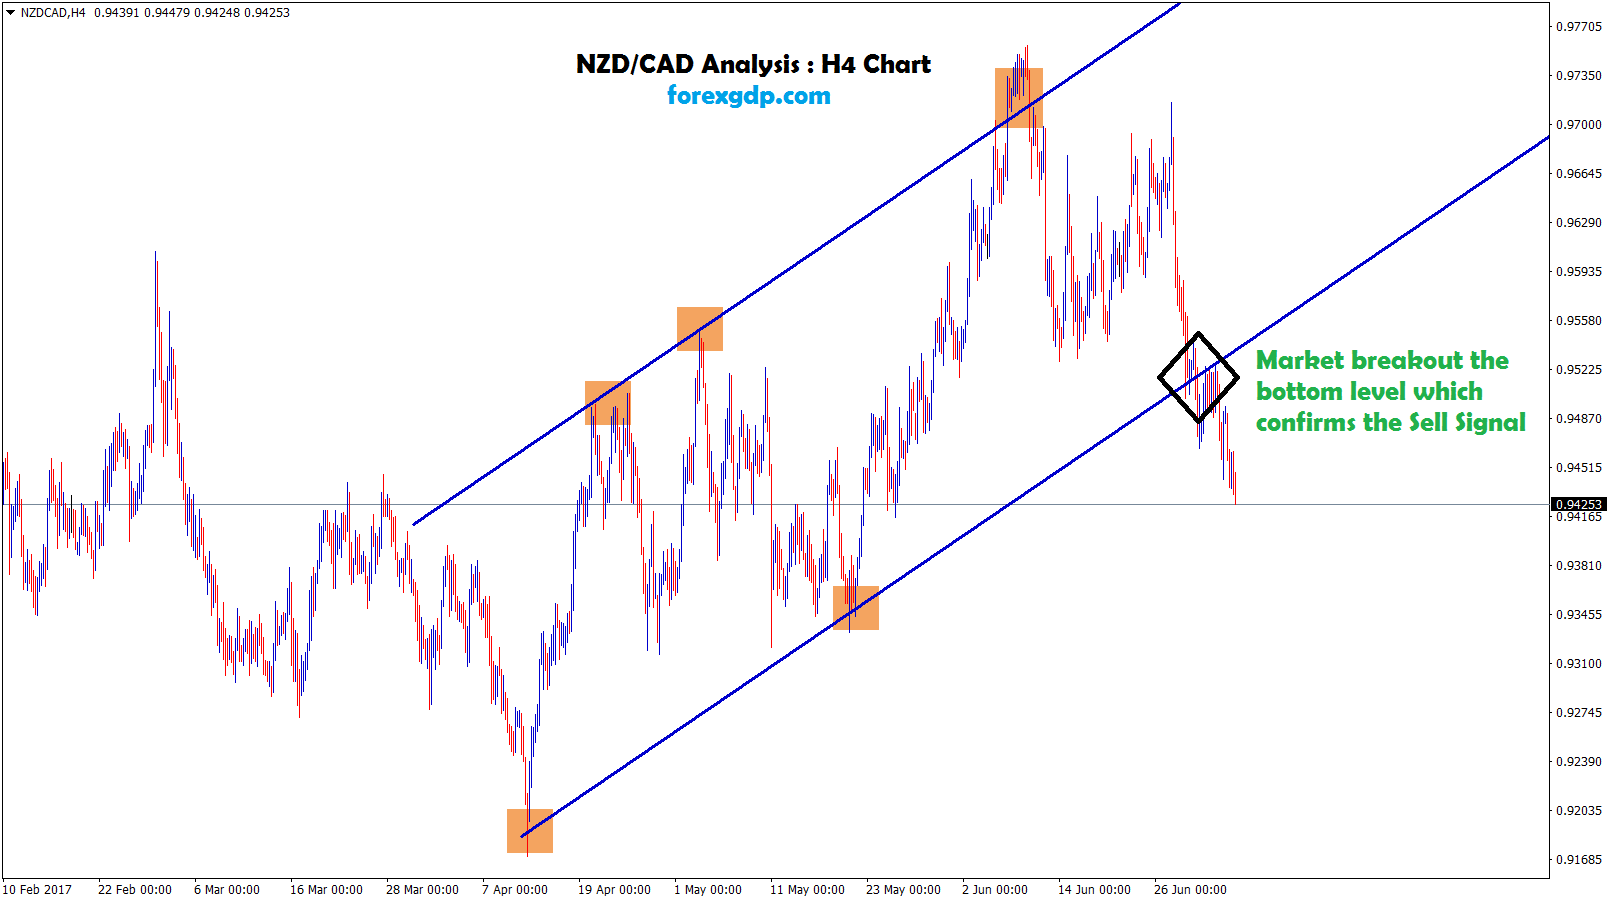 NZD CAD broken the bottom support level confirms sell trade setup